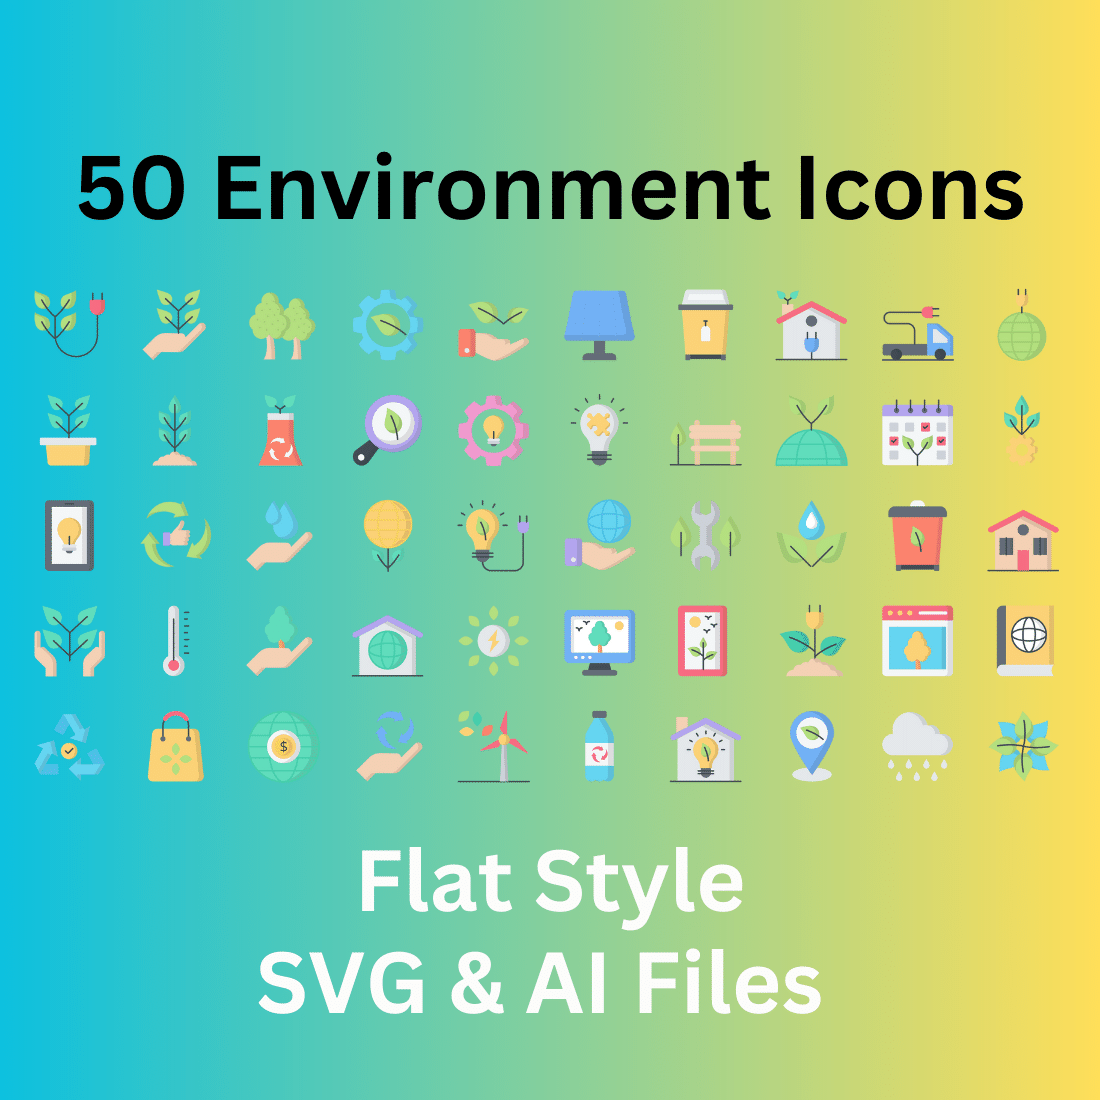 Environment Icon Set 50 Flat Icons - SVG And AI Files cover image.